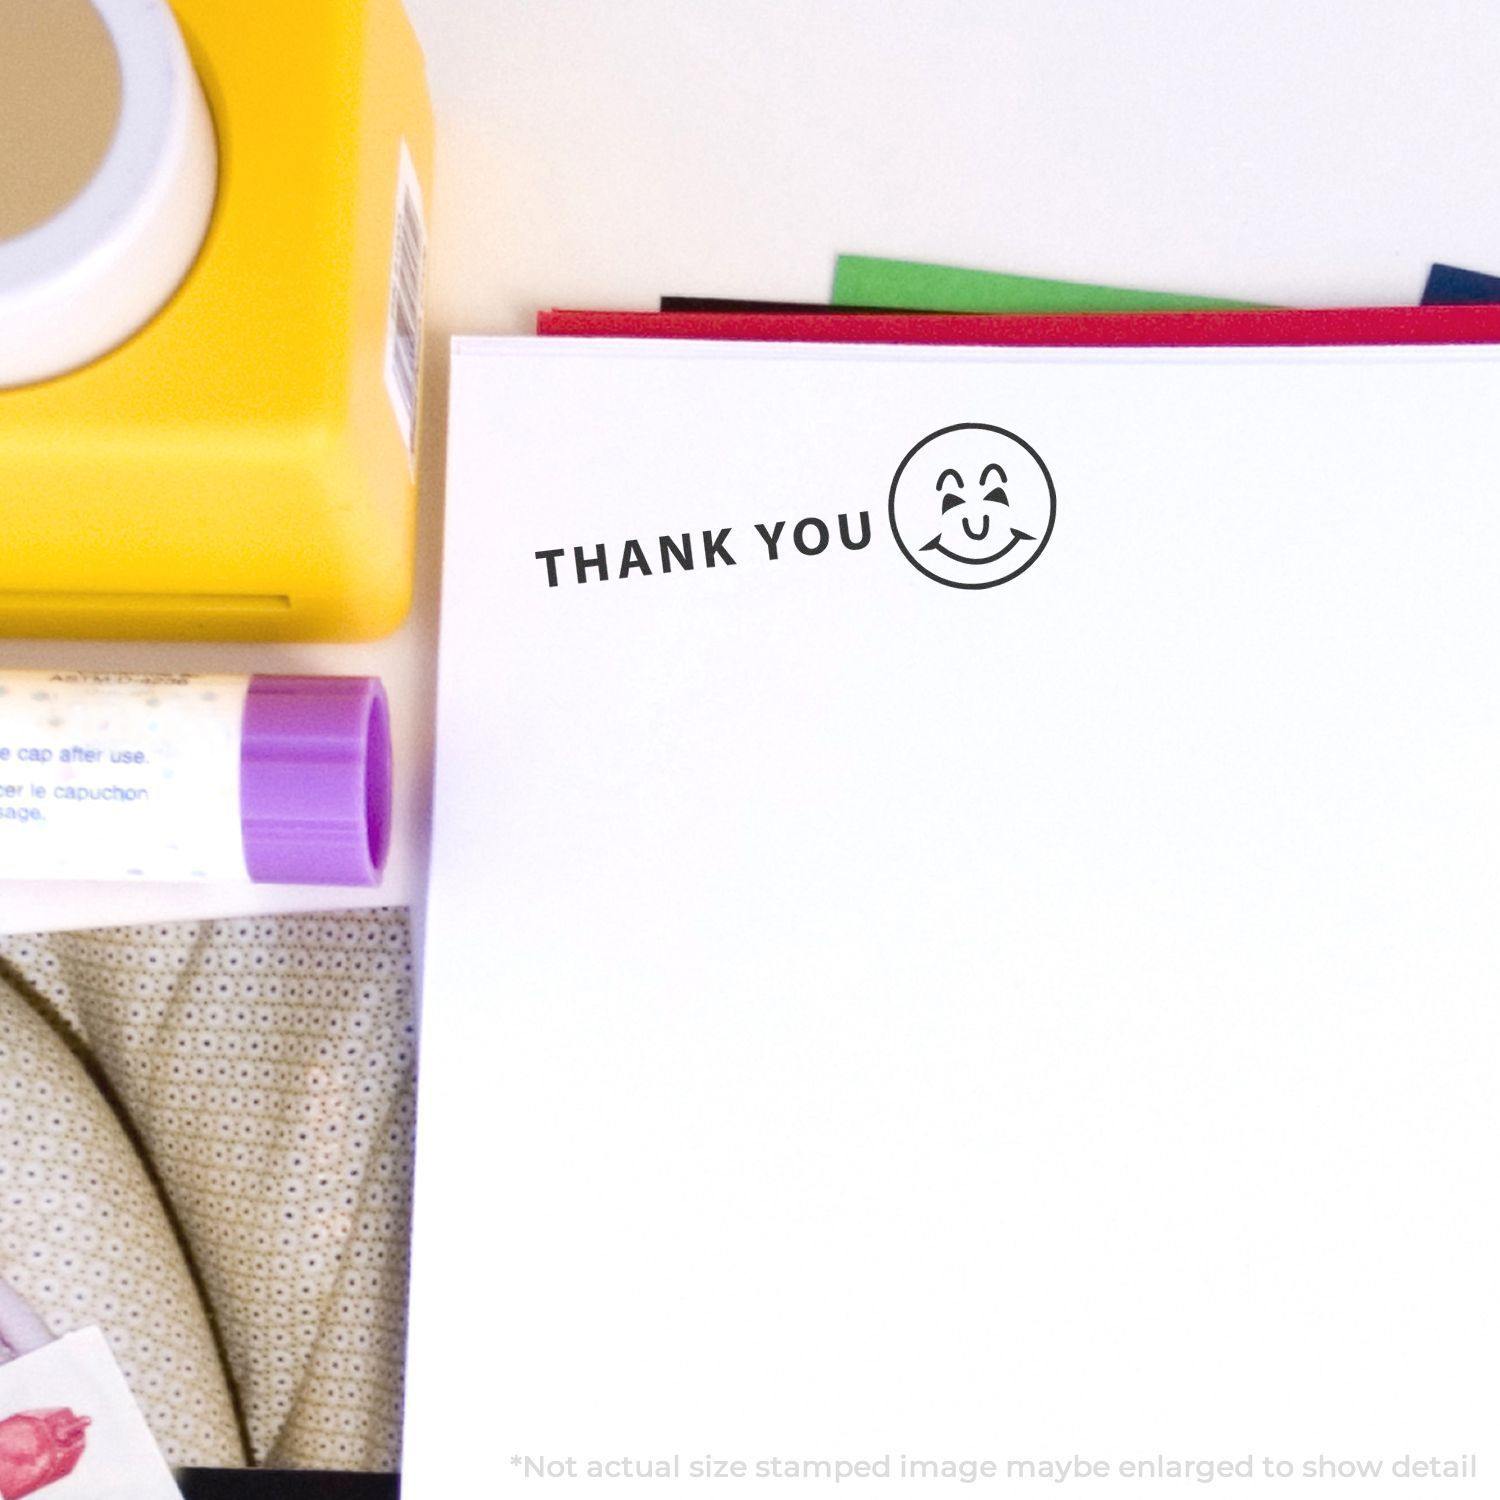 In Use Slim Pre-Inked Thank You with Smiley Stamp Image